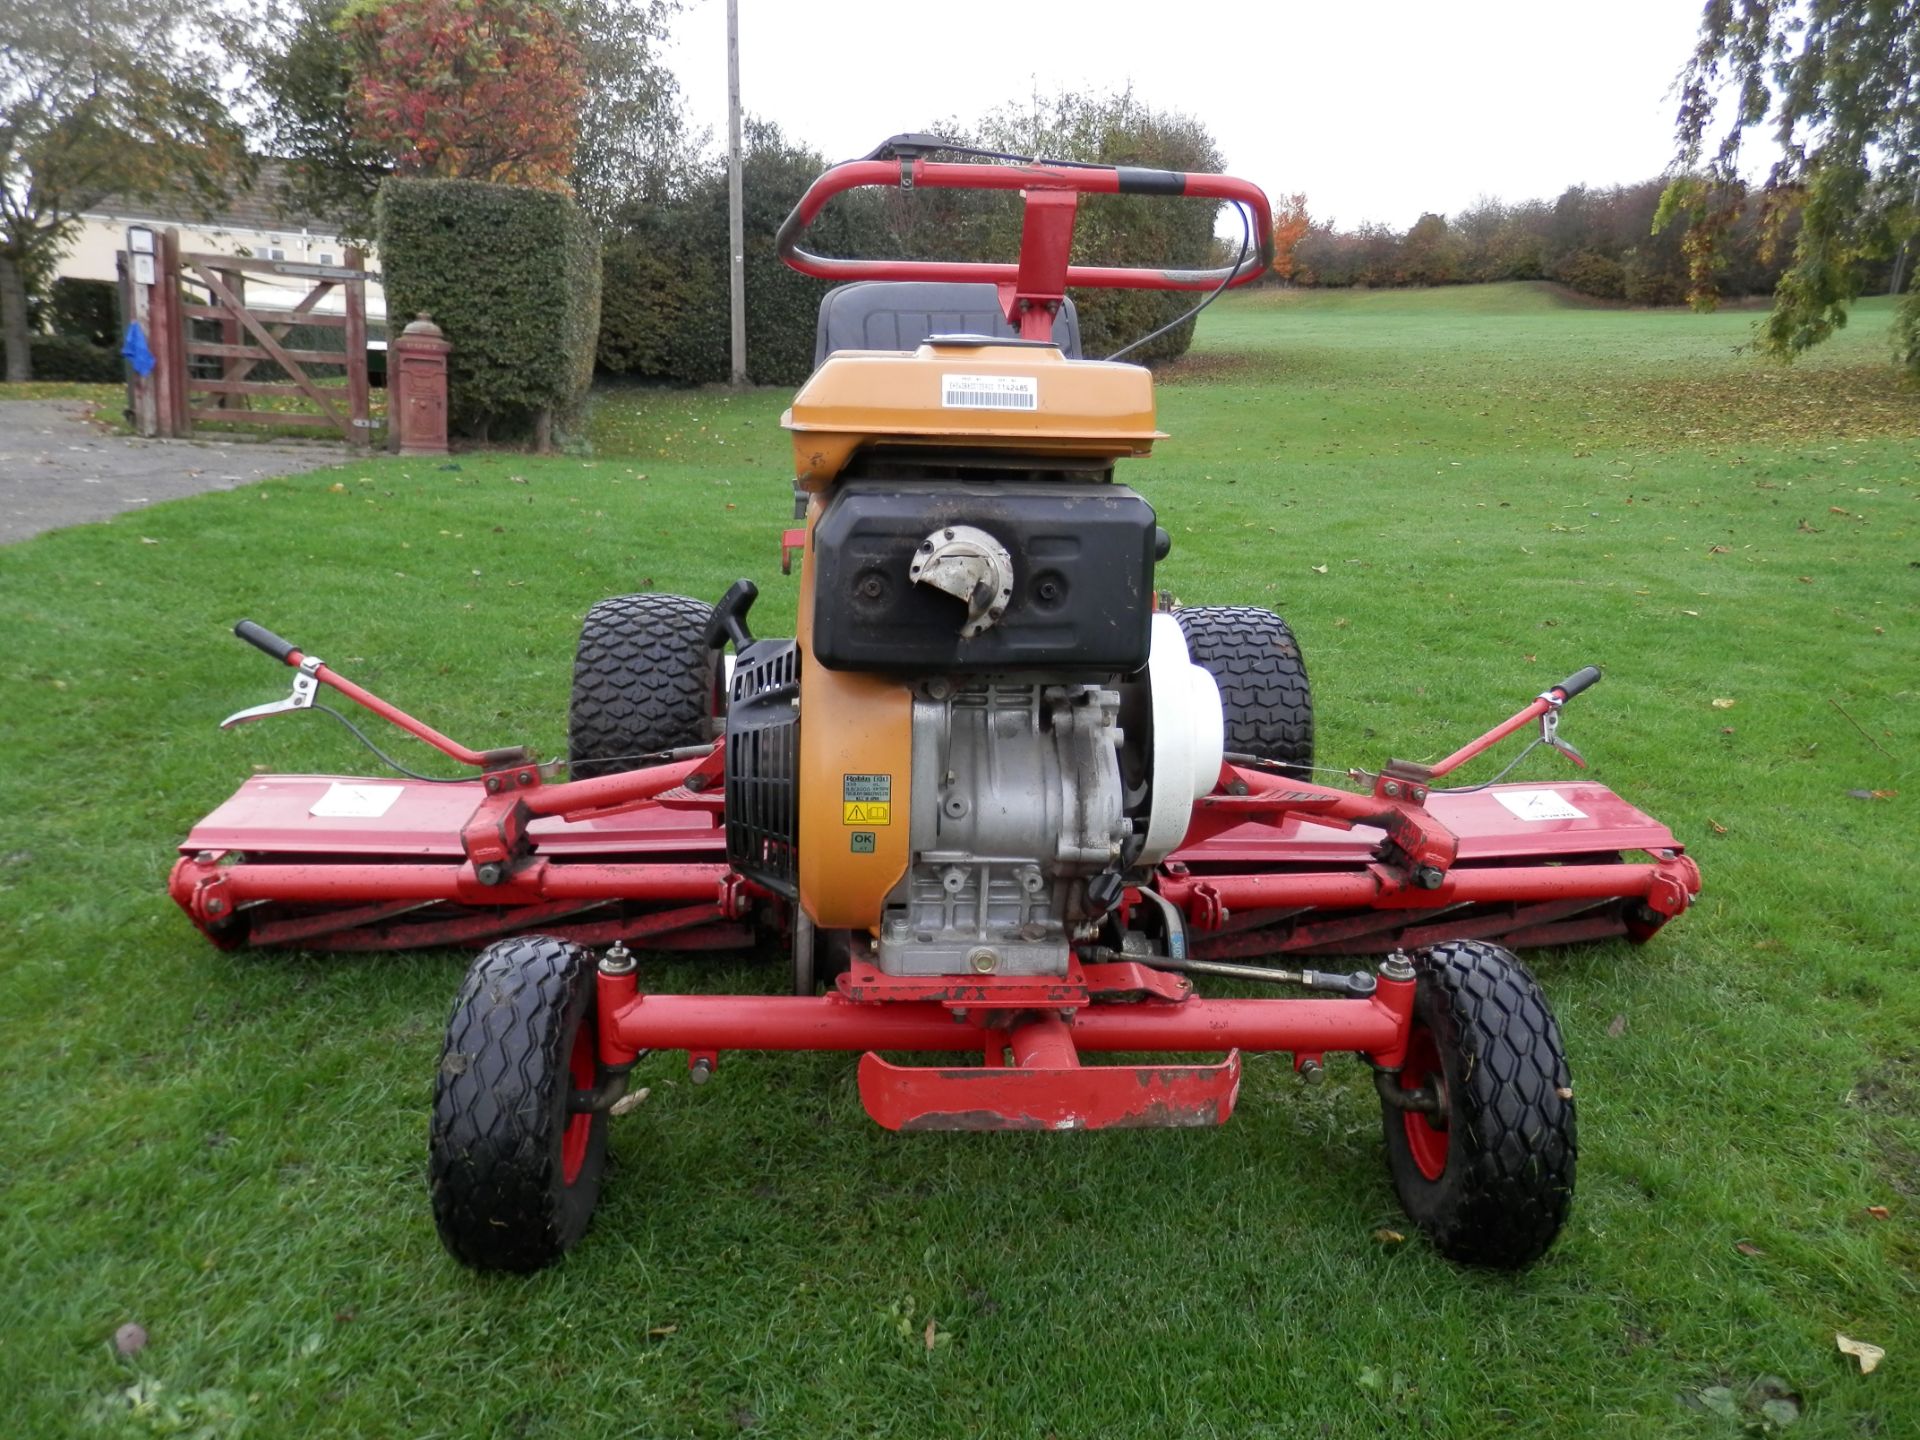 ALL WORKING SAXON TRIPLE MK2 RIDE ON MOWER, UPGRADED WITH GEARS, BRAKE PEDAL & DIFF LOCK. - Image 9 of 14